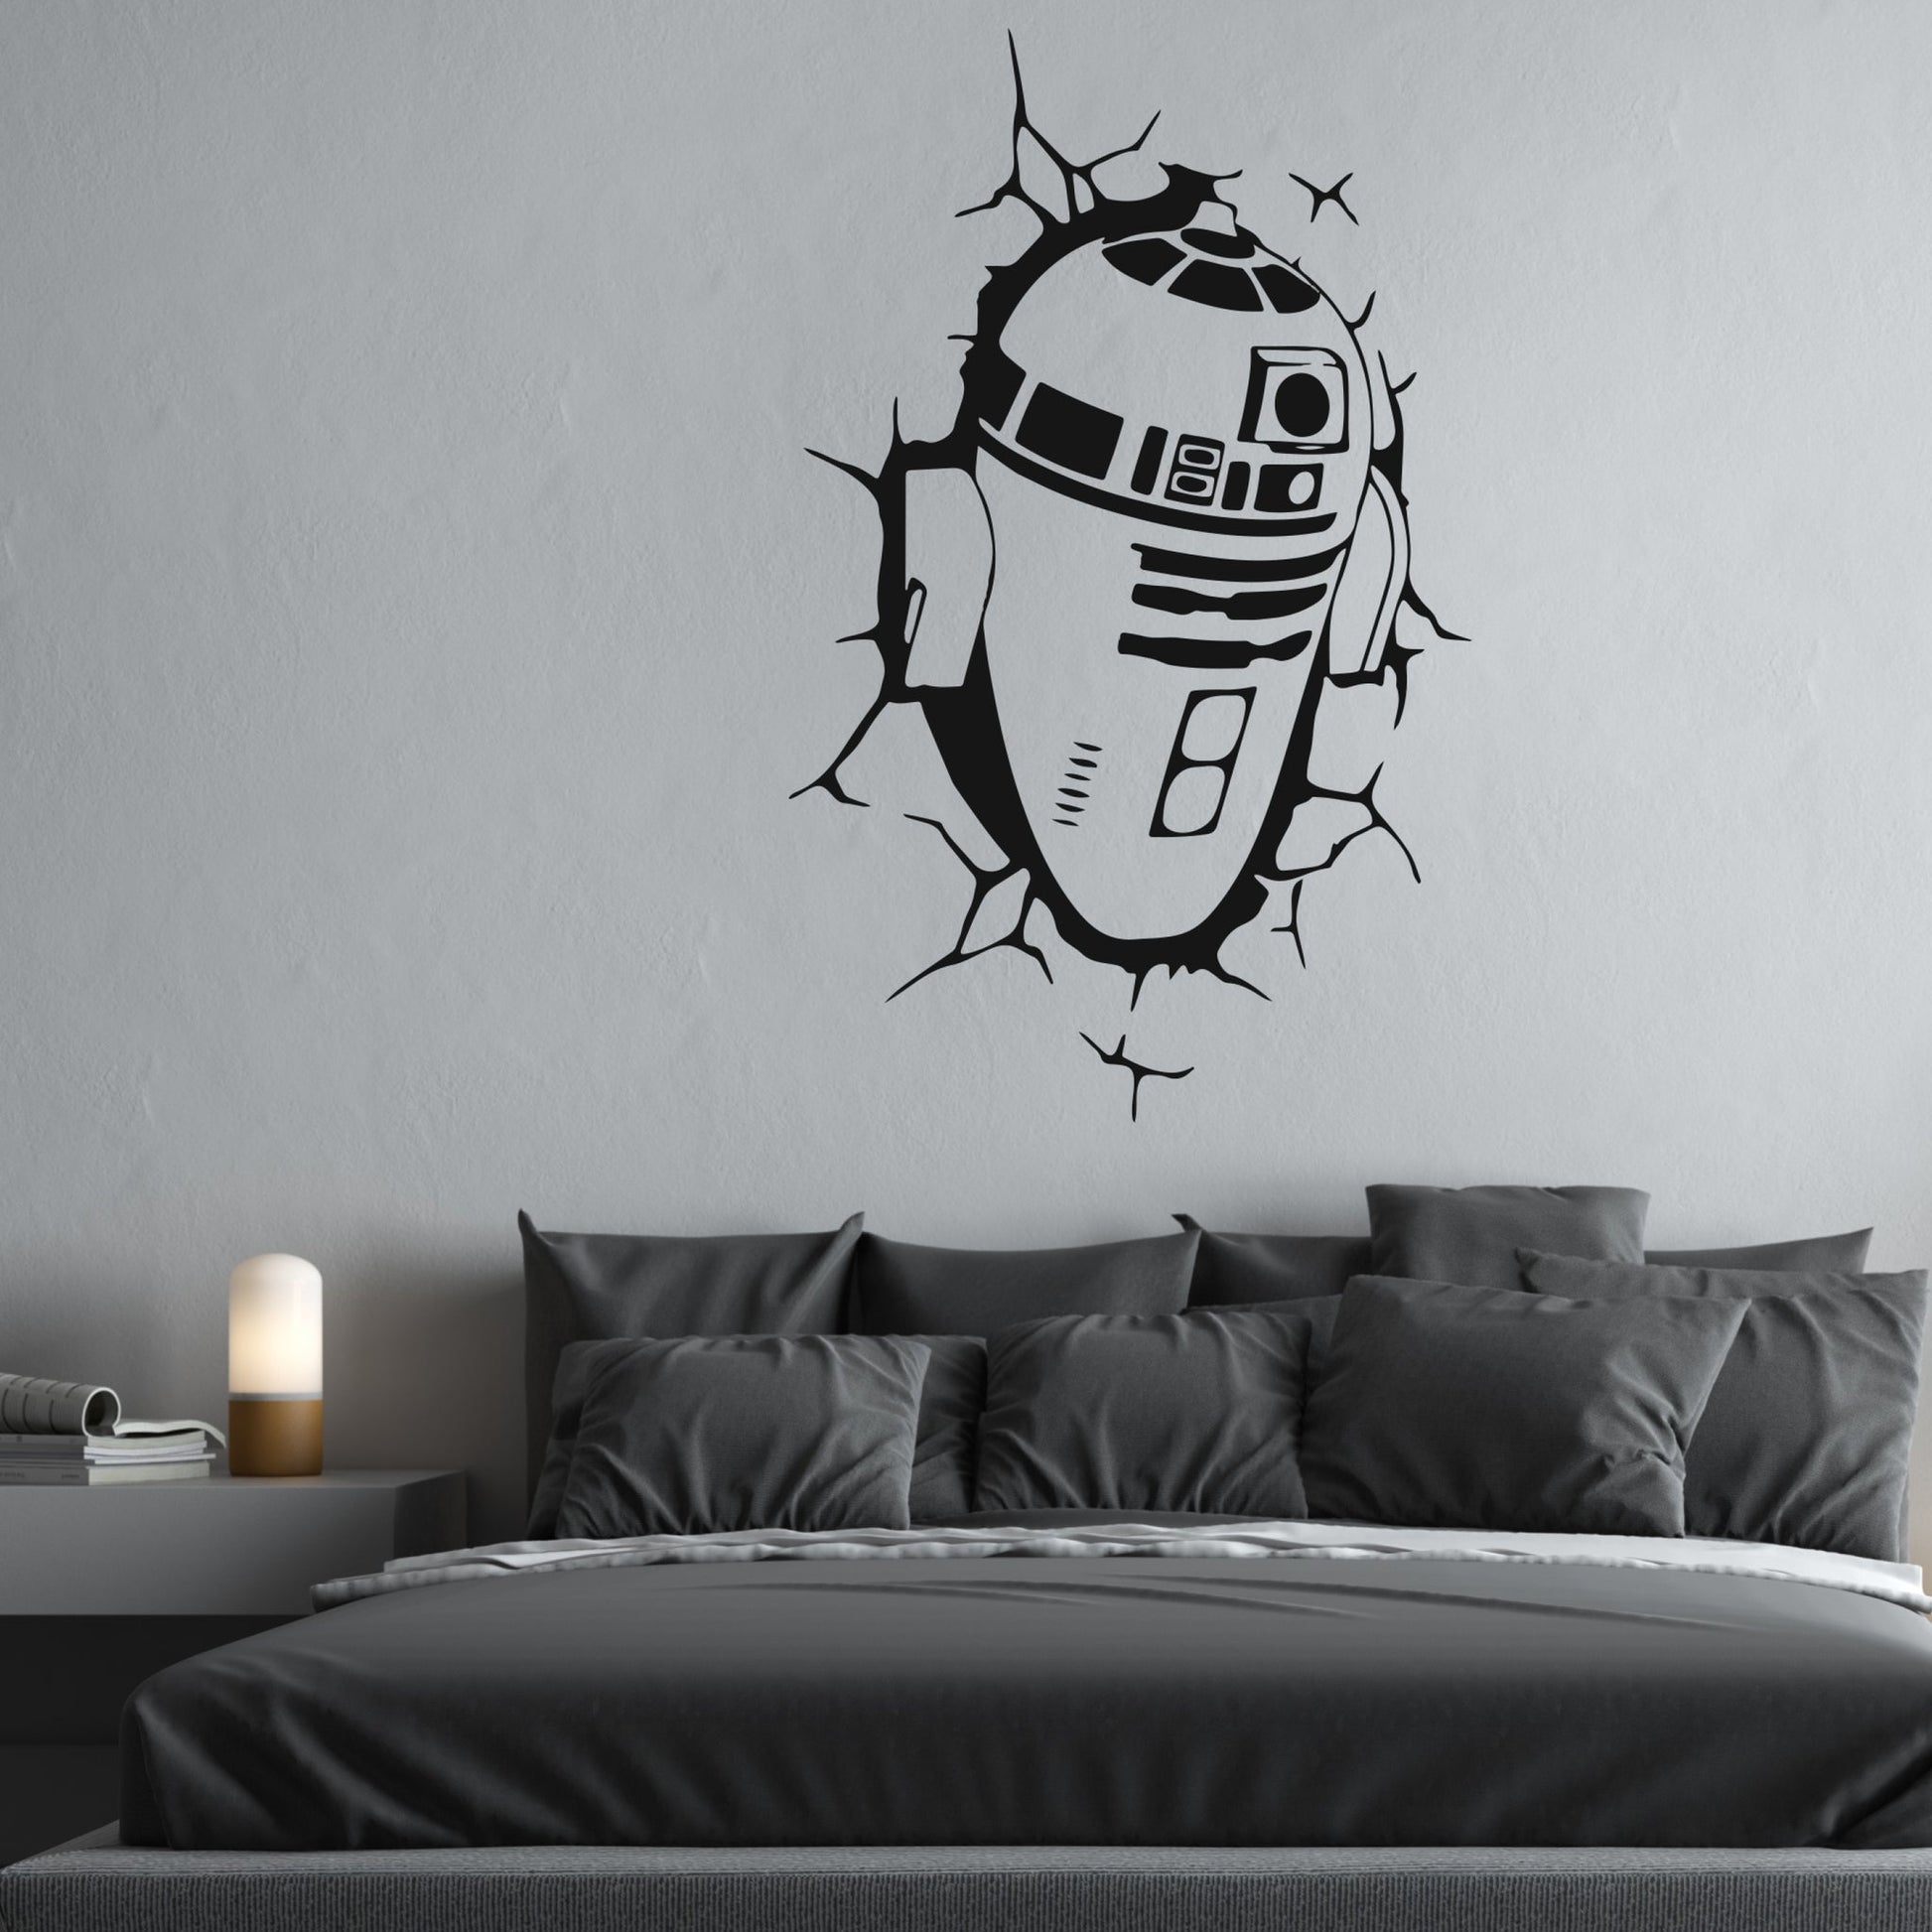 Star Wars R2D2 Wall graphic vinyl Decal Sticker on bedroom wall